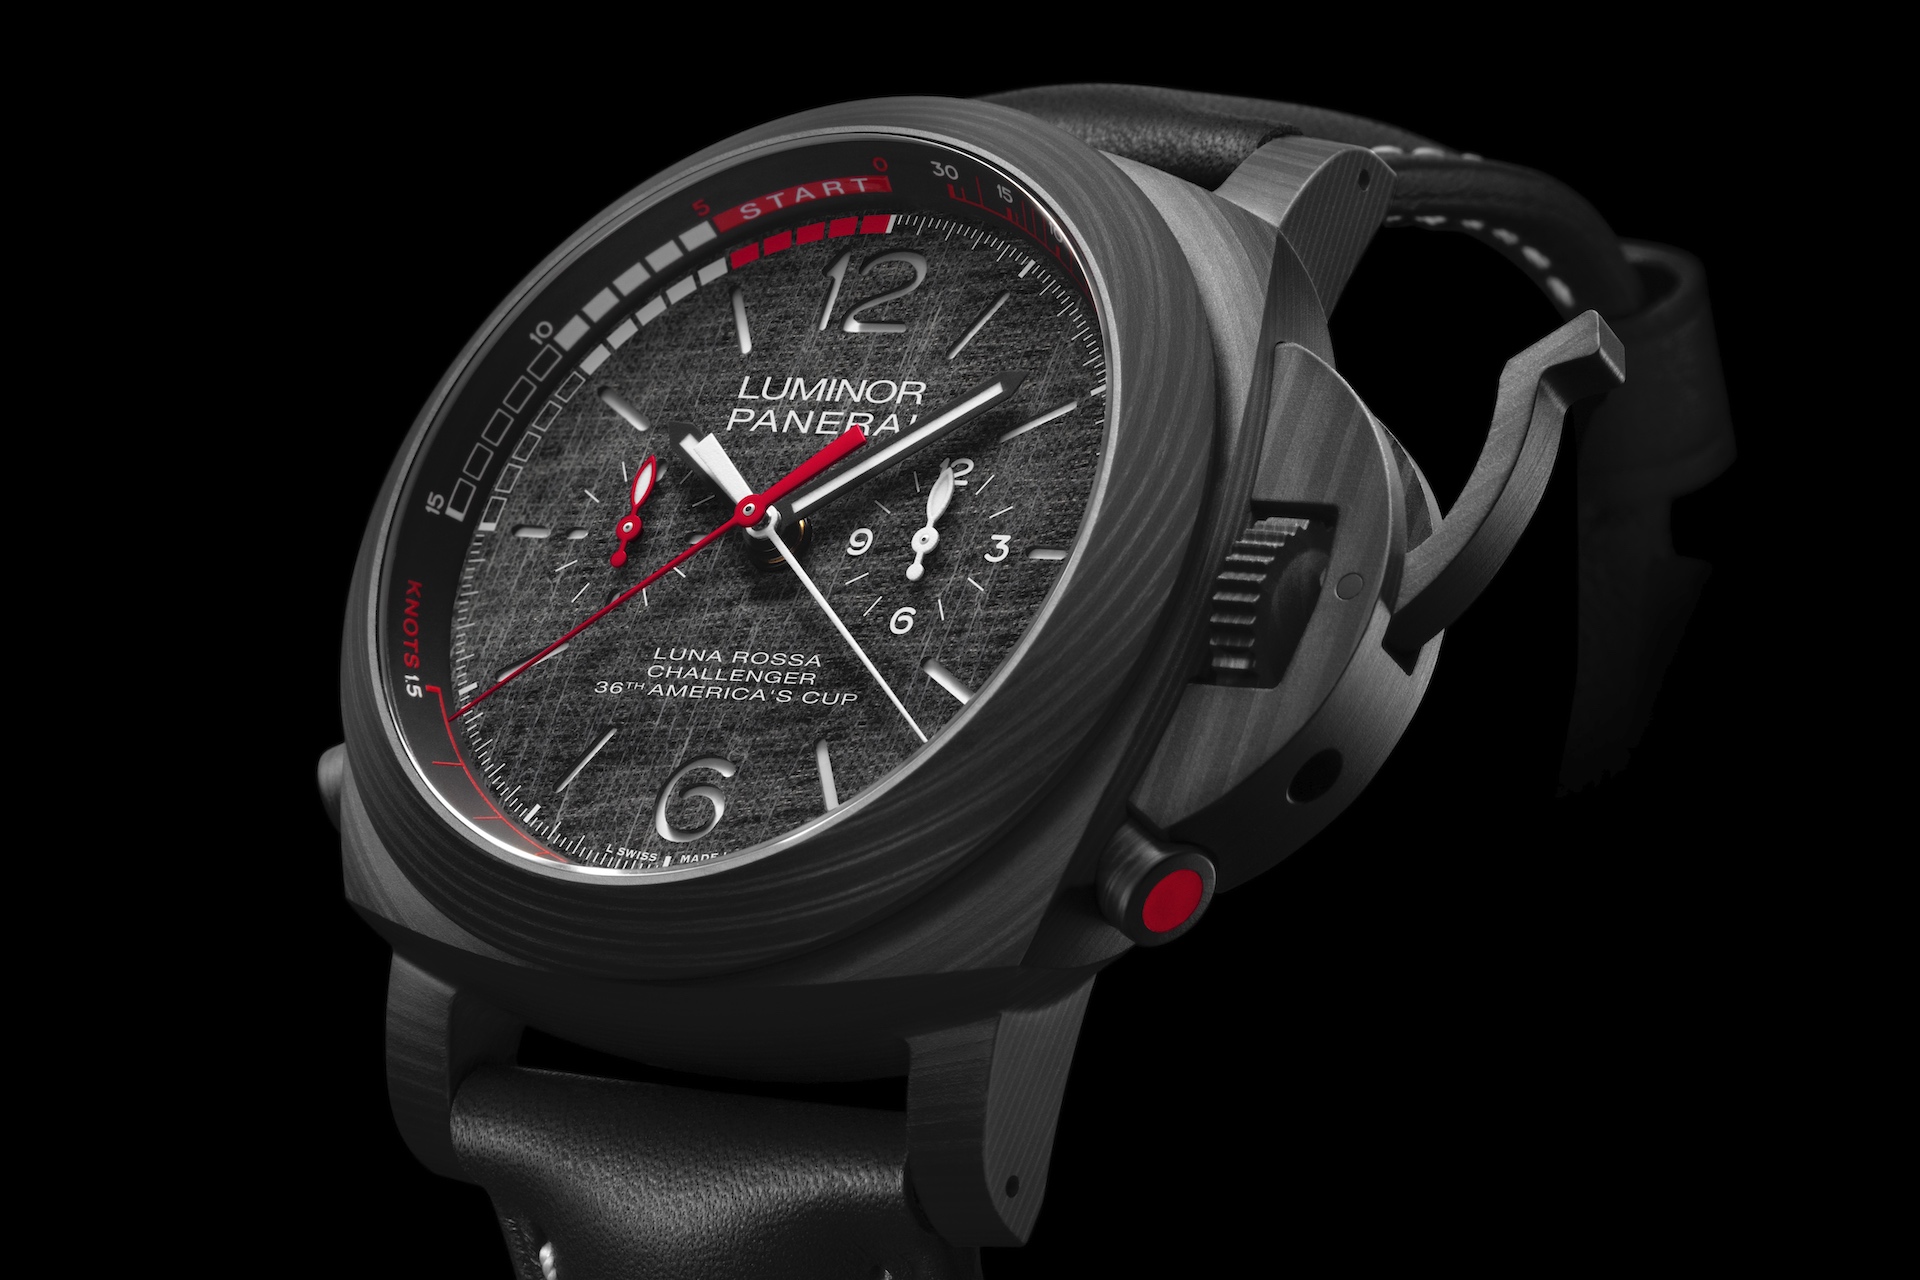 Introducing The Panerai Luna Rossa Inspired By 36th America’s Cup